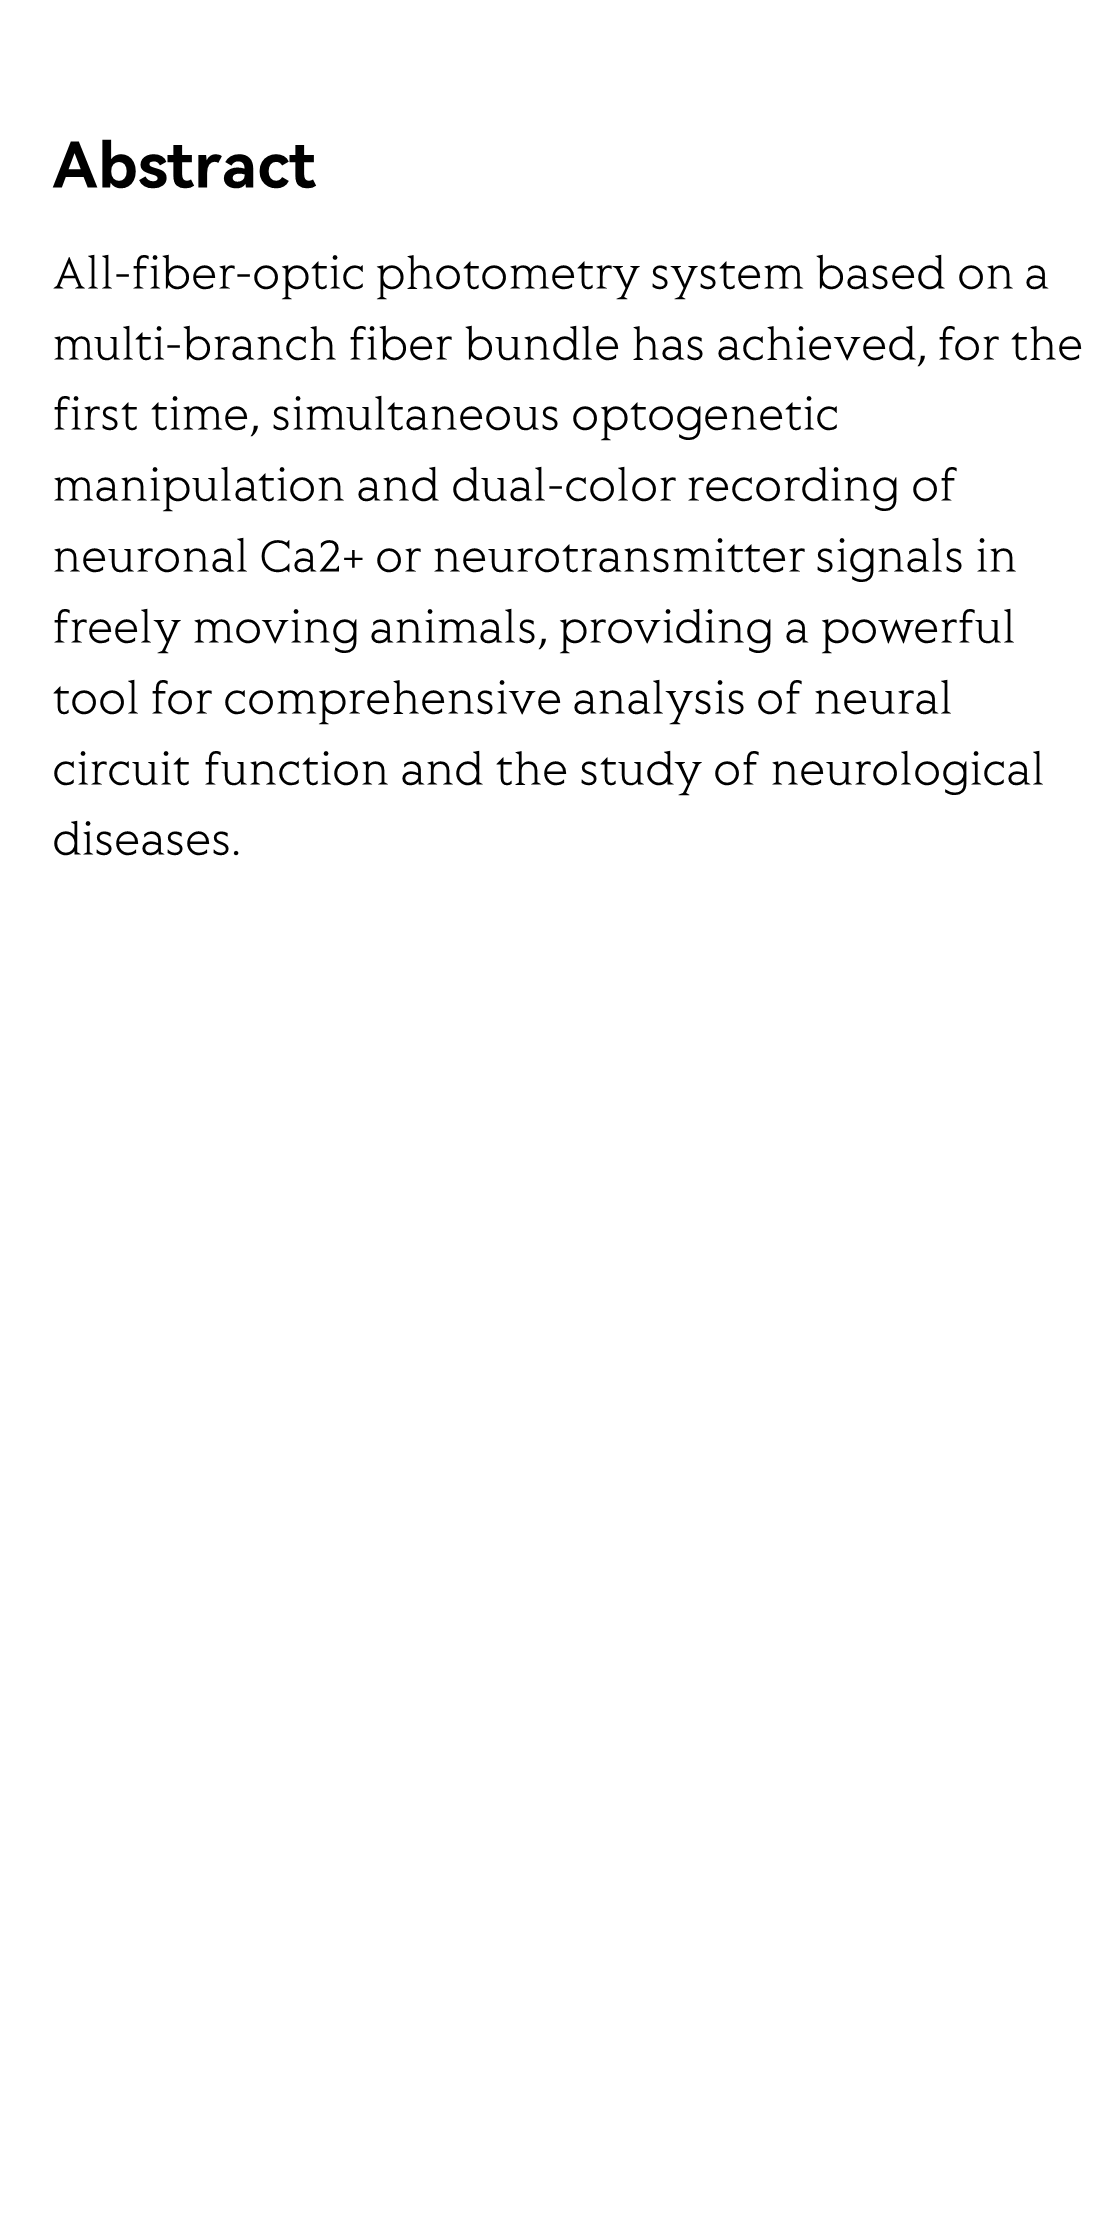 Novel all-fiber-optic technology for control and multi-color probing of neural circuits in freely-moving animals_2